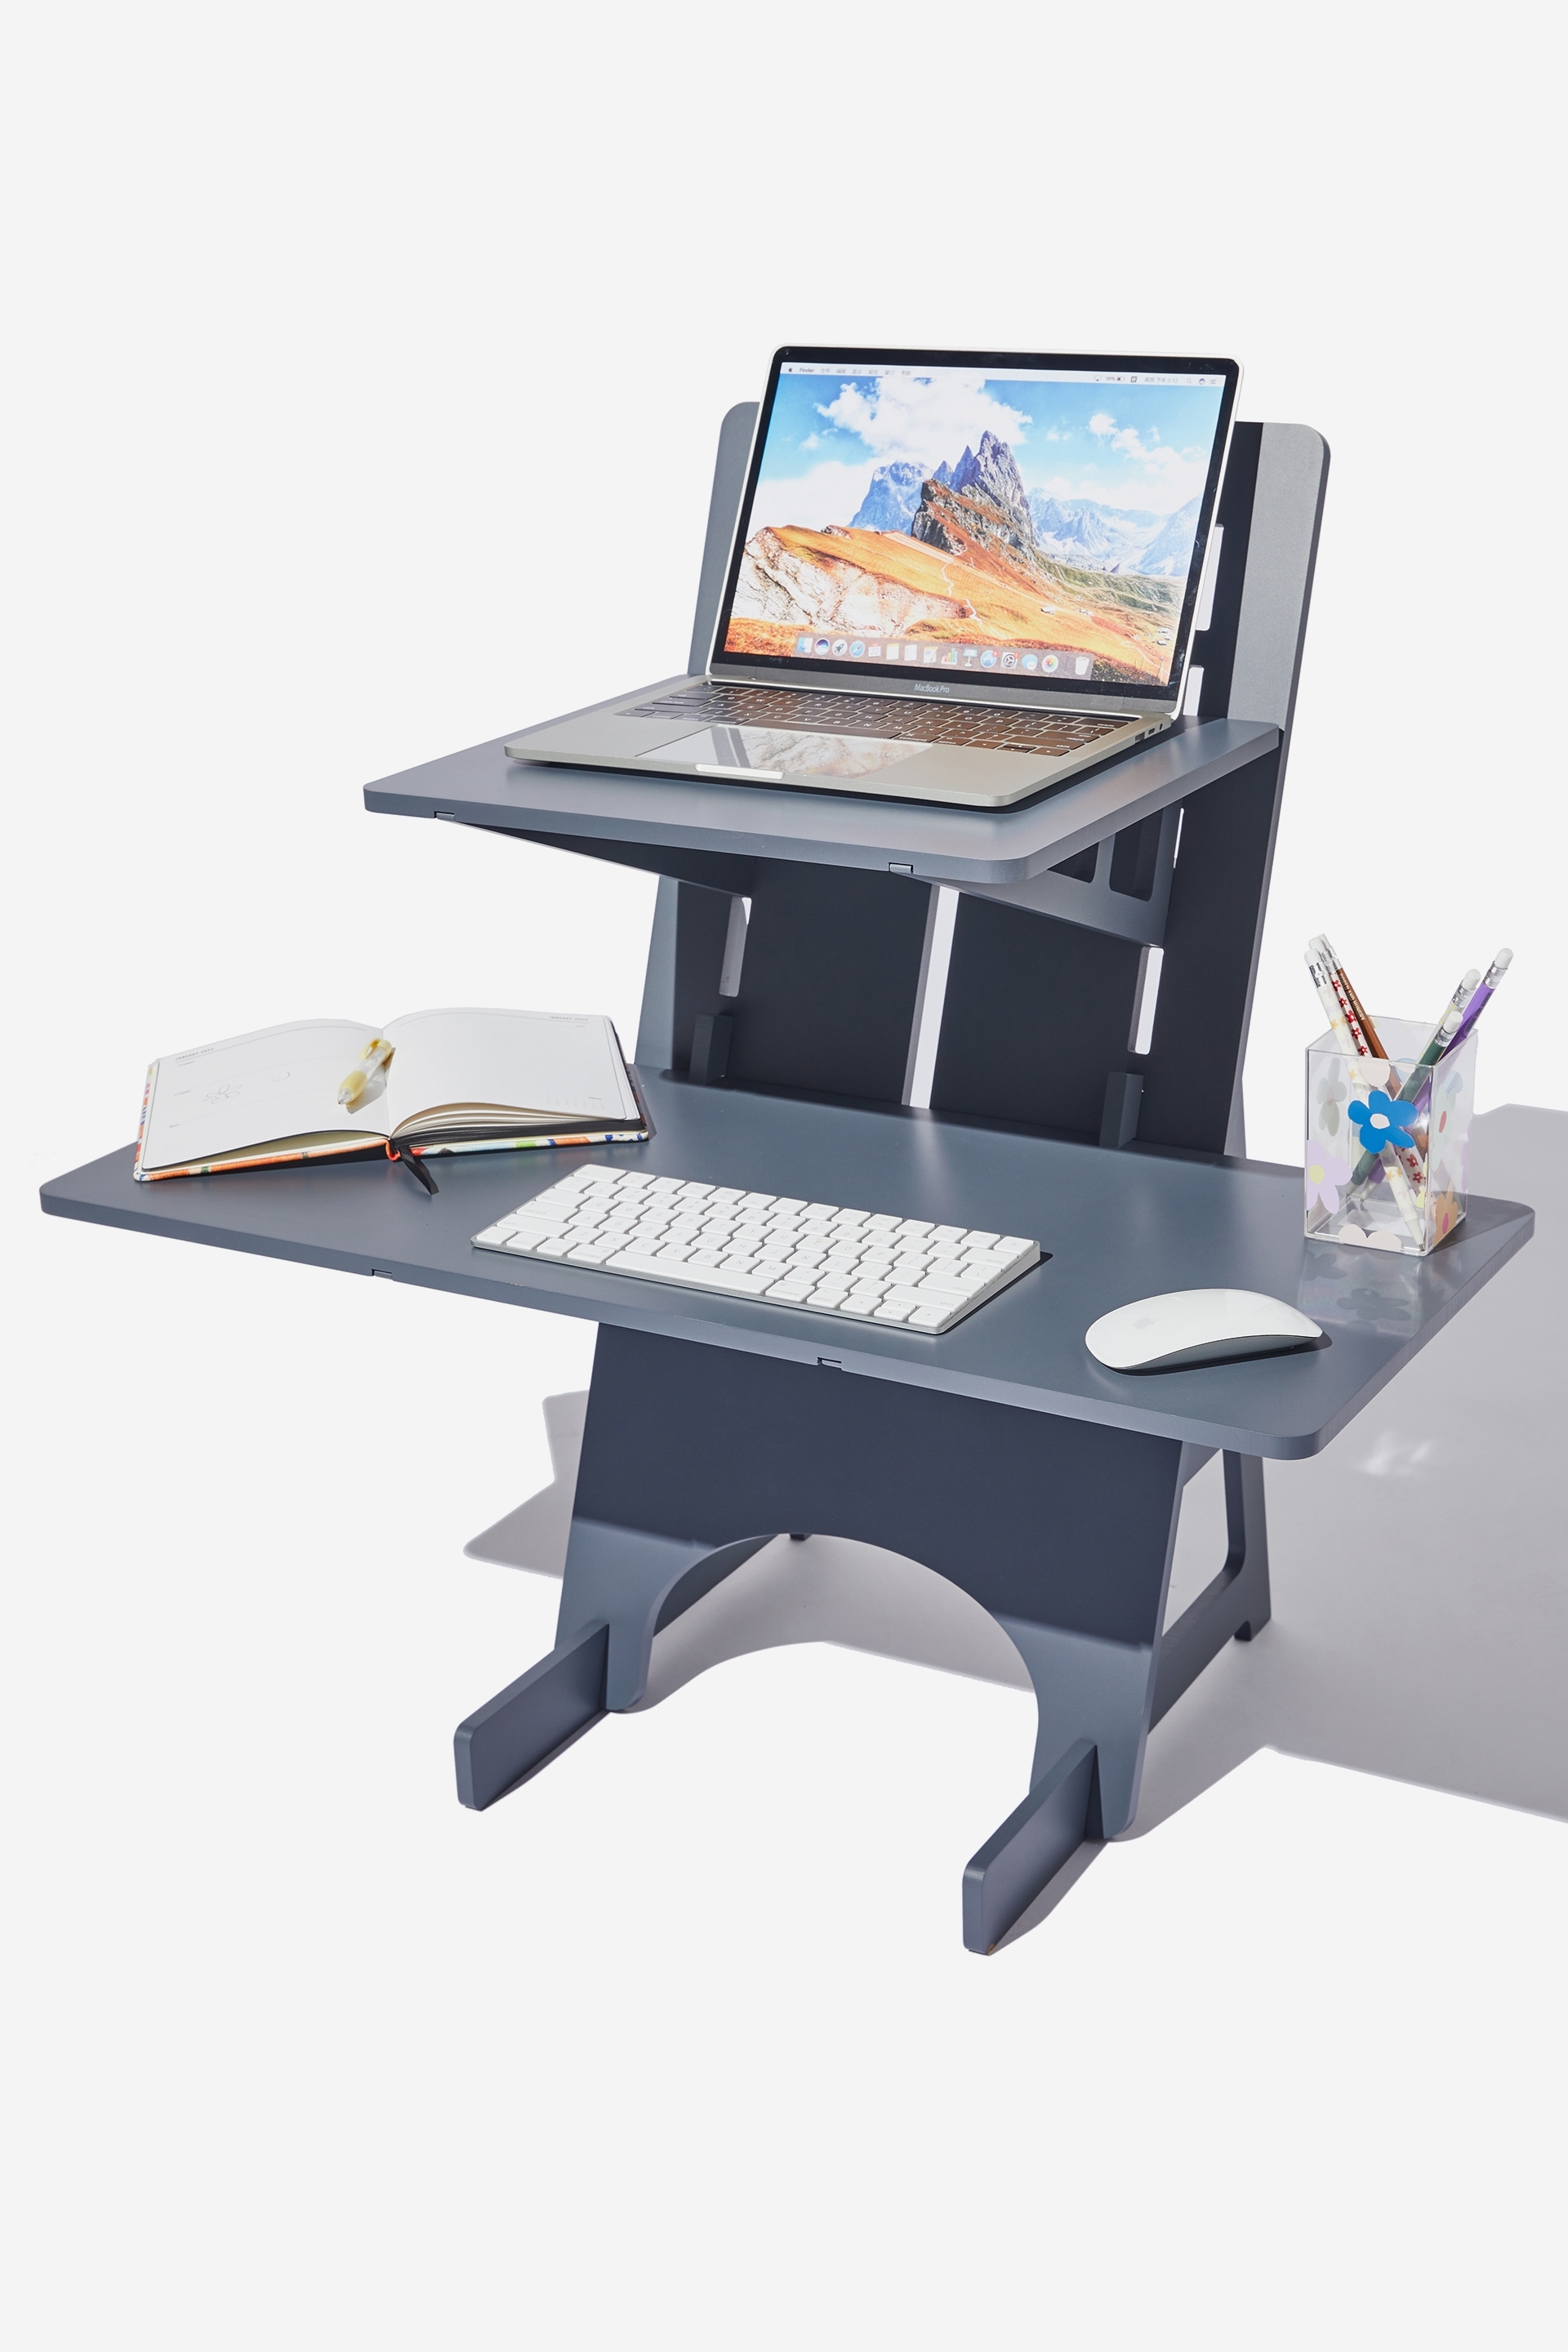 Typo - Collapsible Standing Desk - Welsh slate